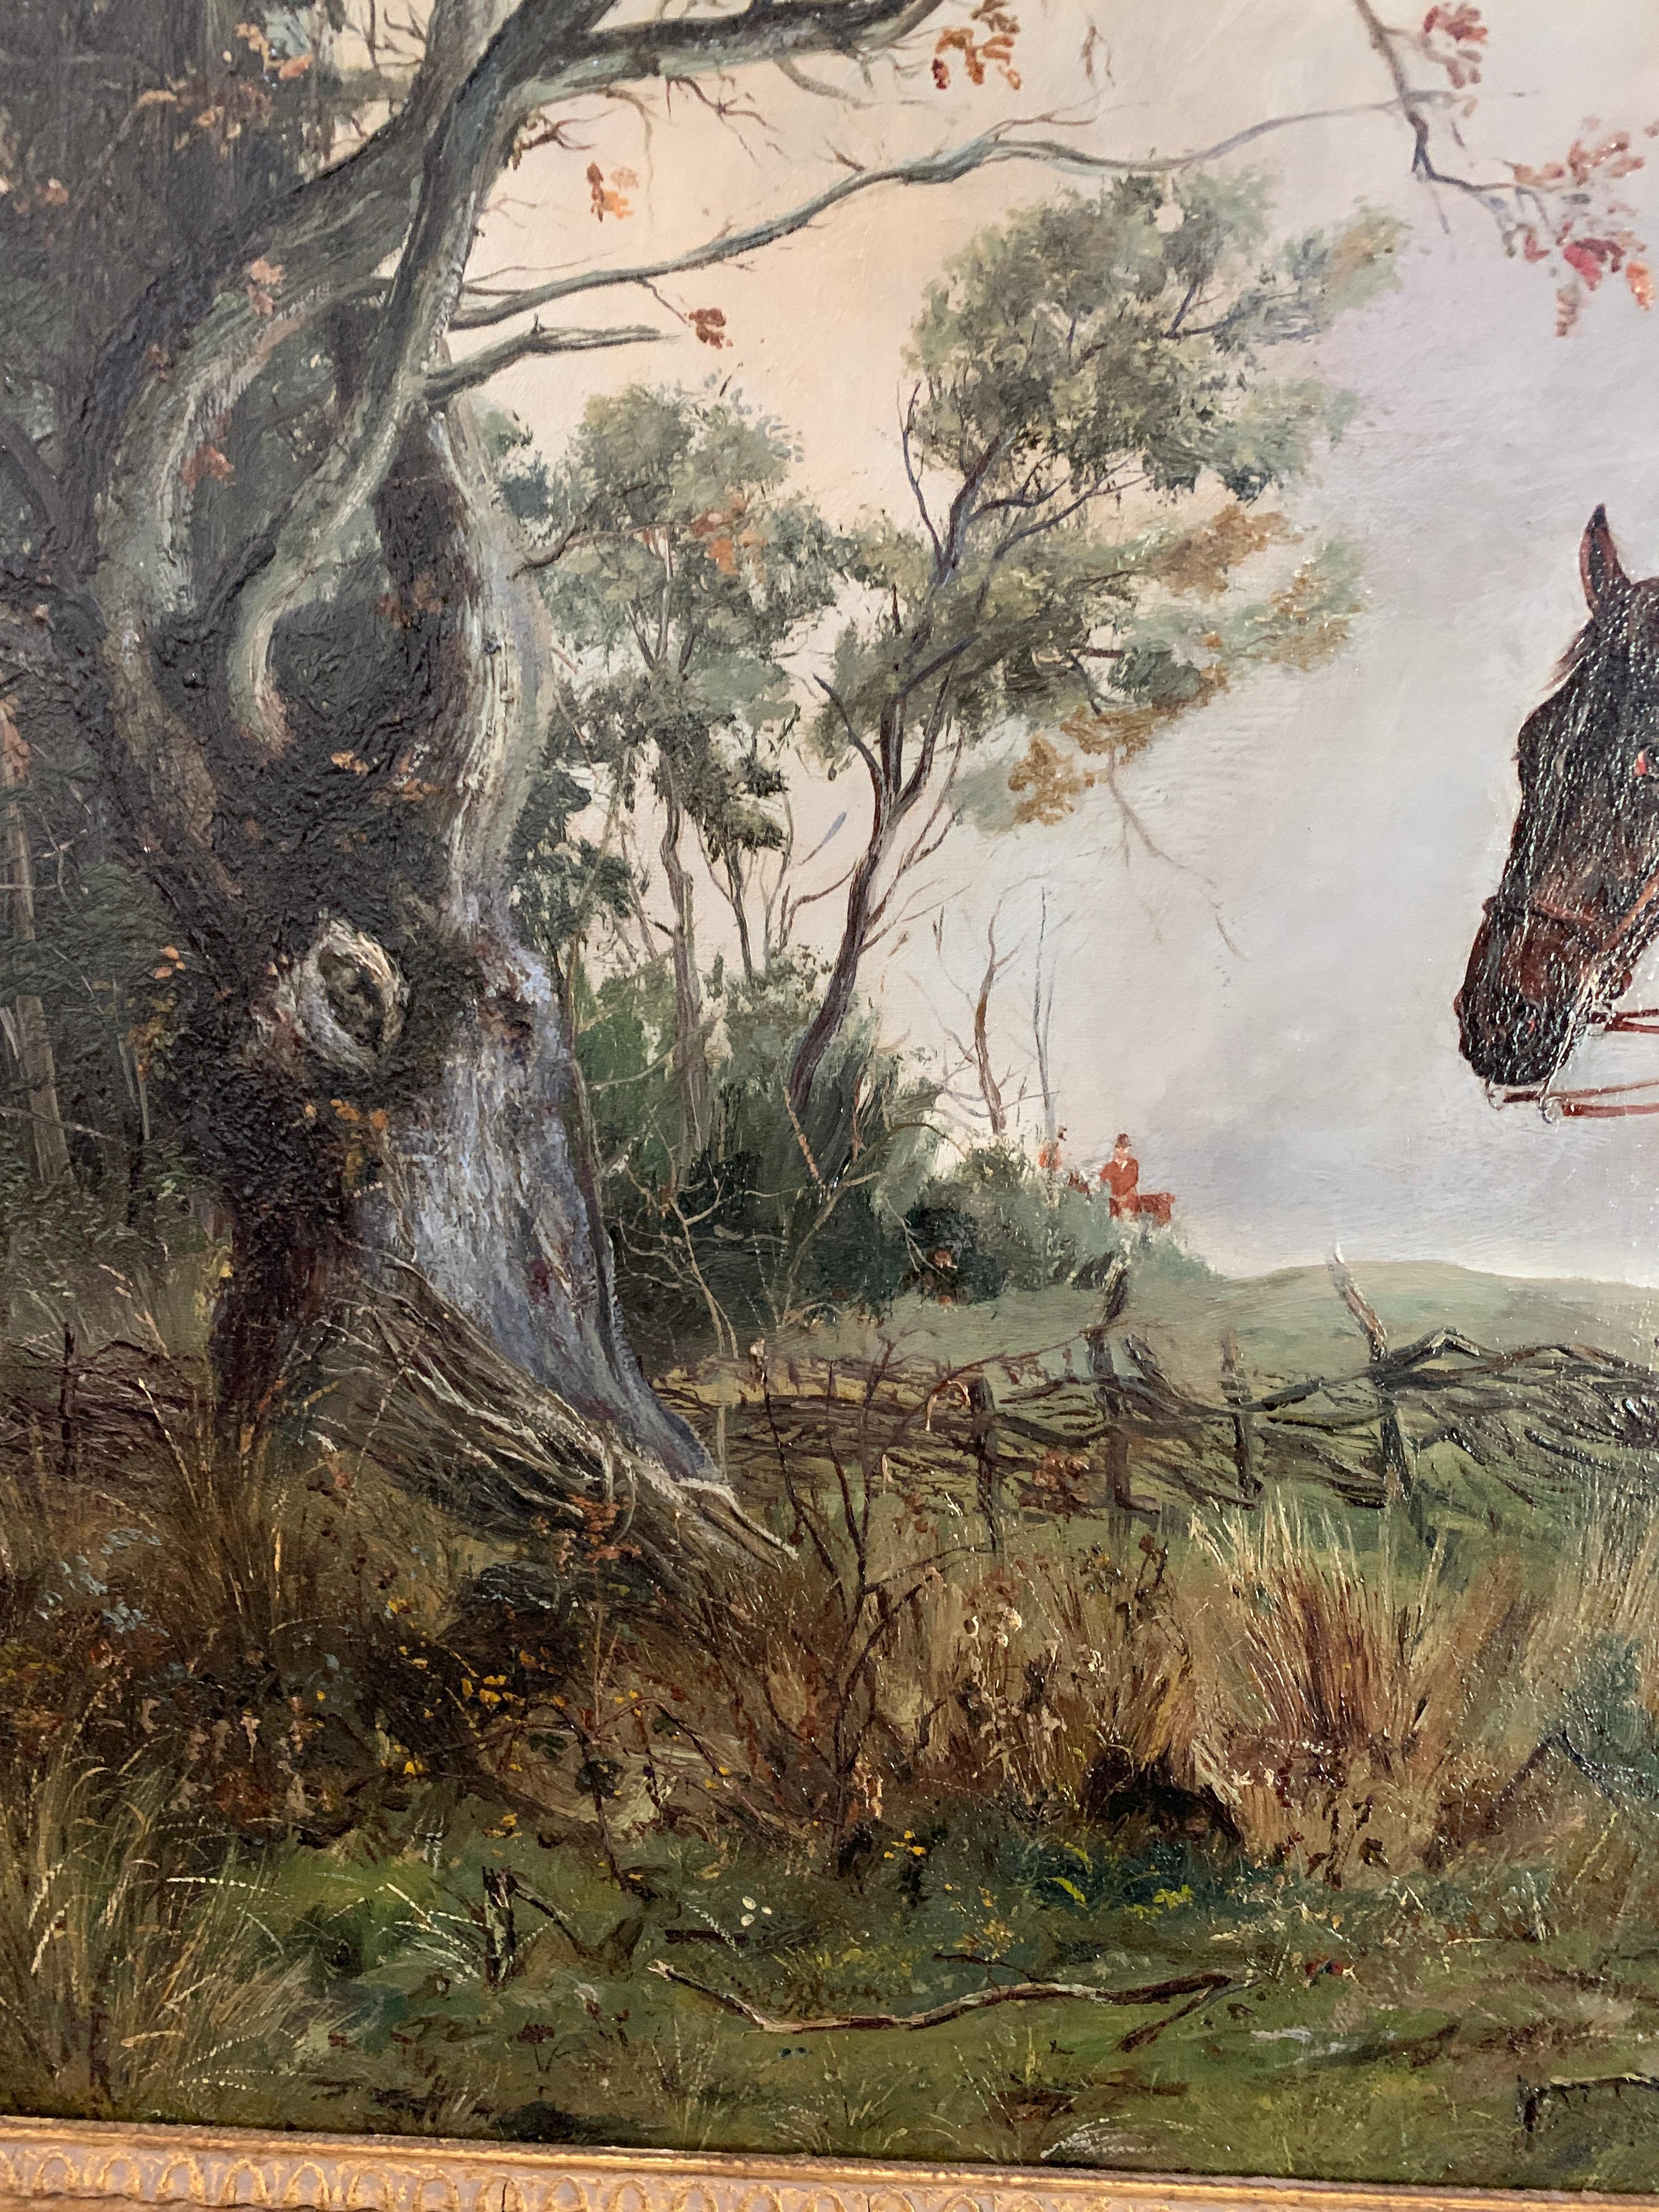 English portrait of a huntsman on his horse in a landscape. W. Goodall hunting with the  Pytchley hounds

Henry Frederick Lucas Lucas was born in Louth, Lincolnshire in 1848 to St. John Wells, a surgeon, and Louisa Lucas. By 1871, his mother had